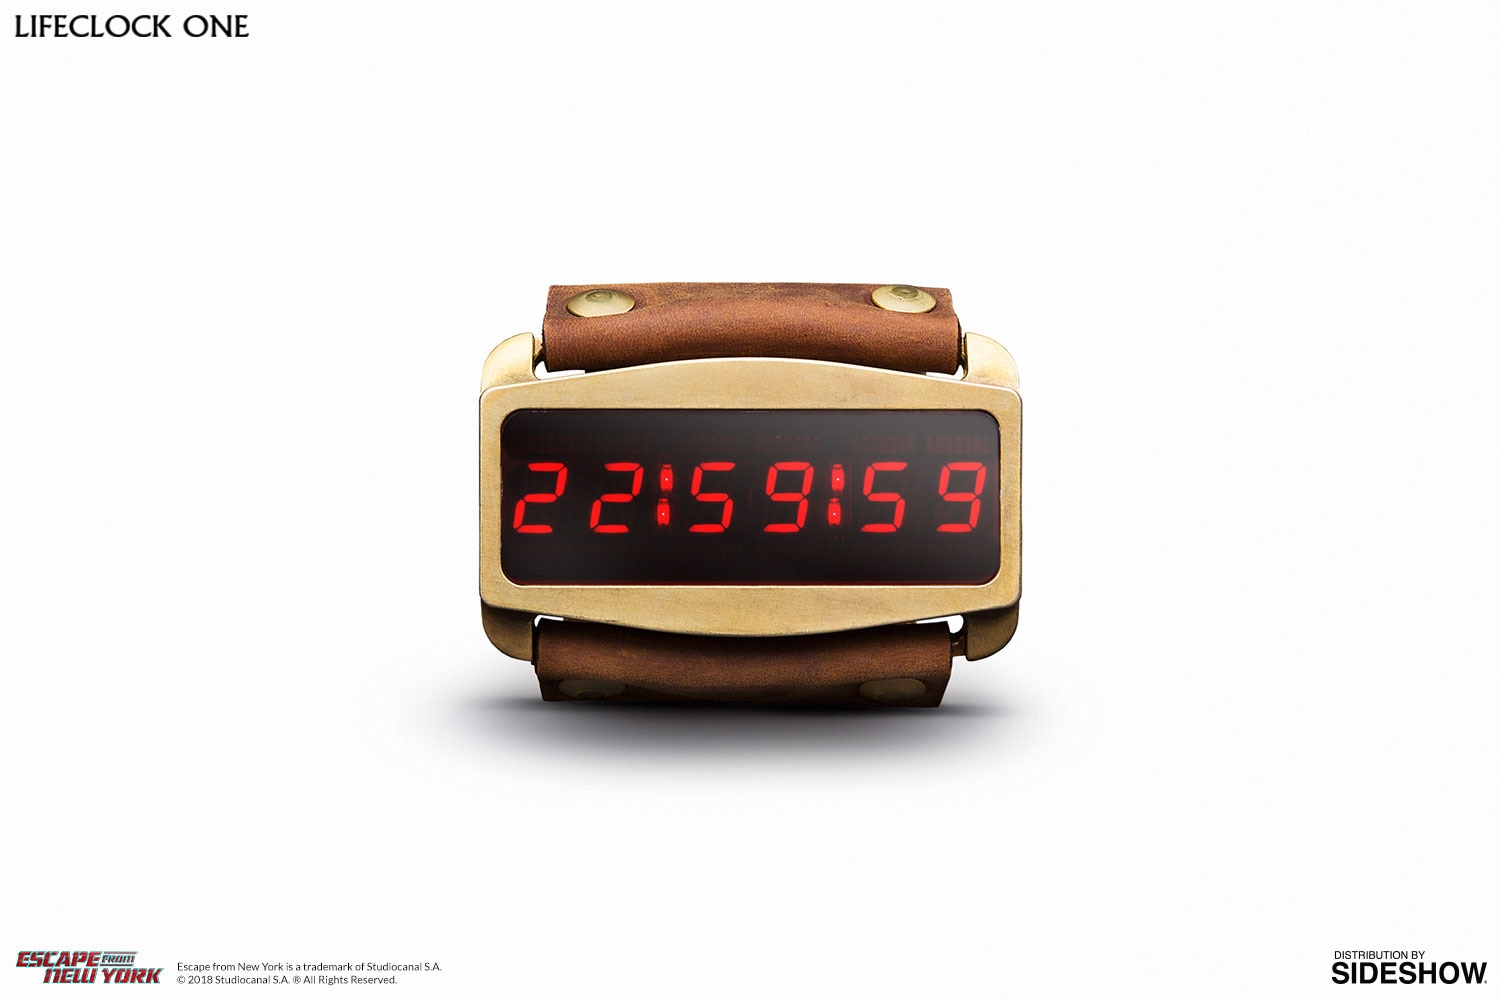 Lifeclock One Snake Edition Smartwatch